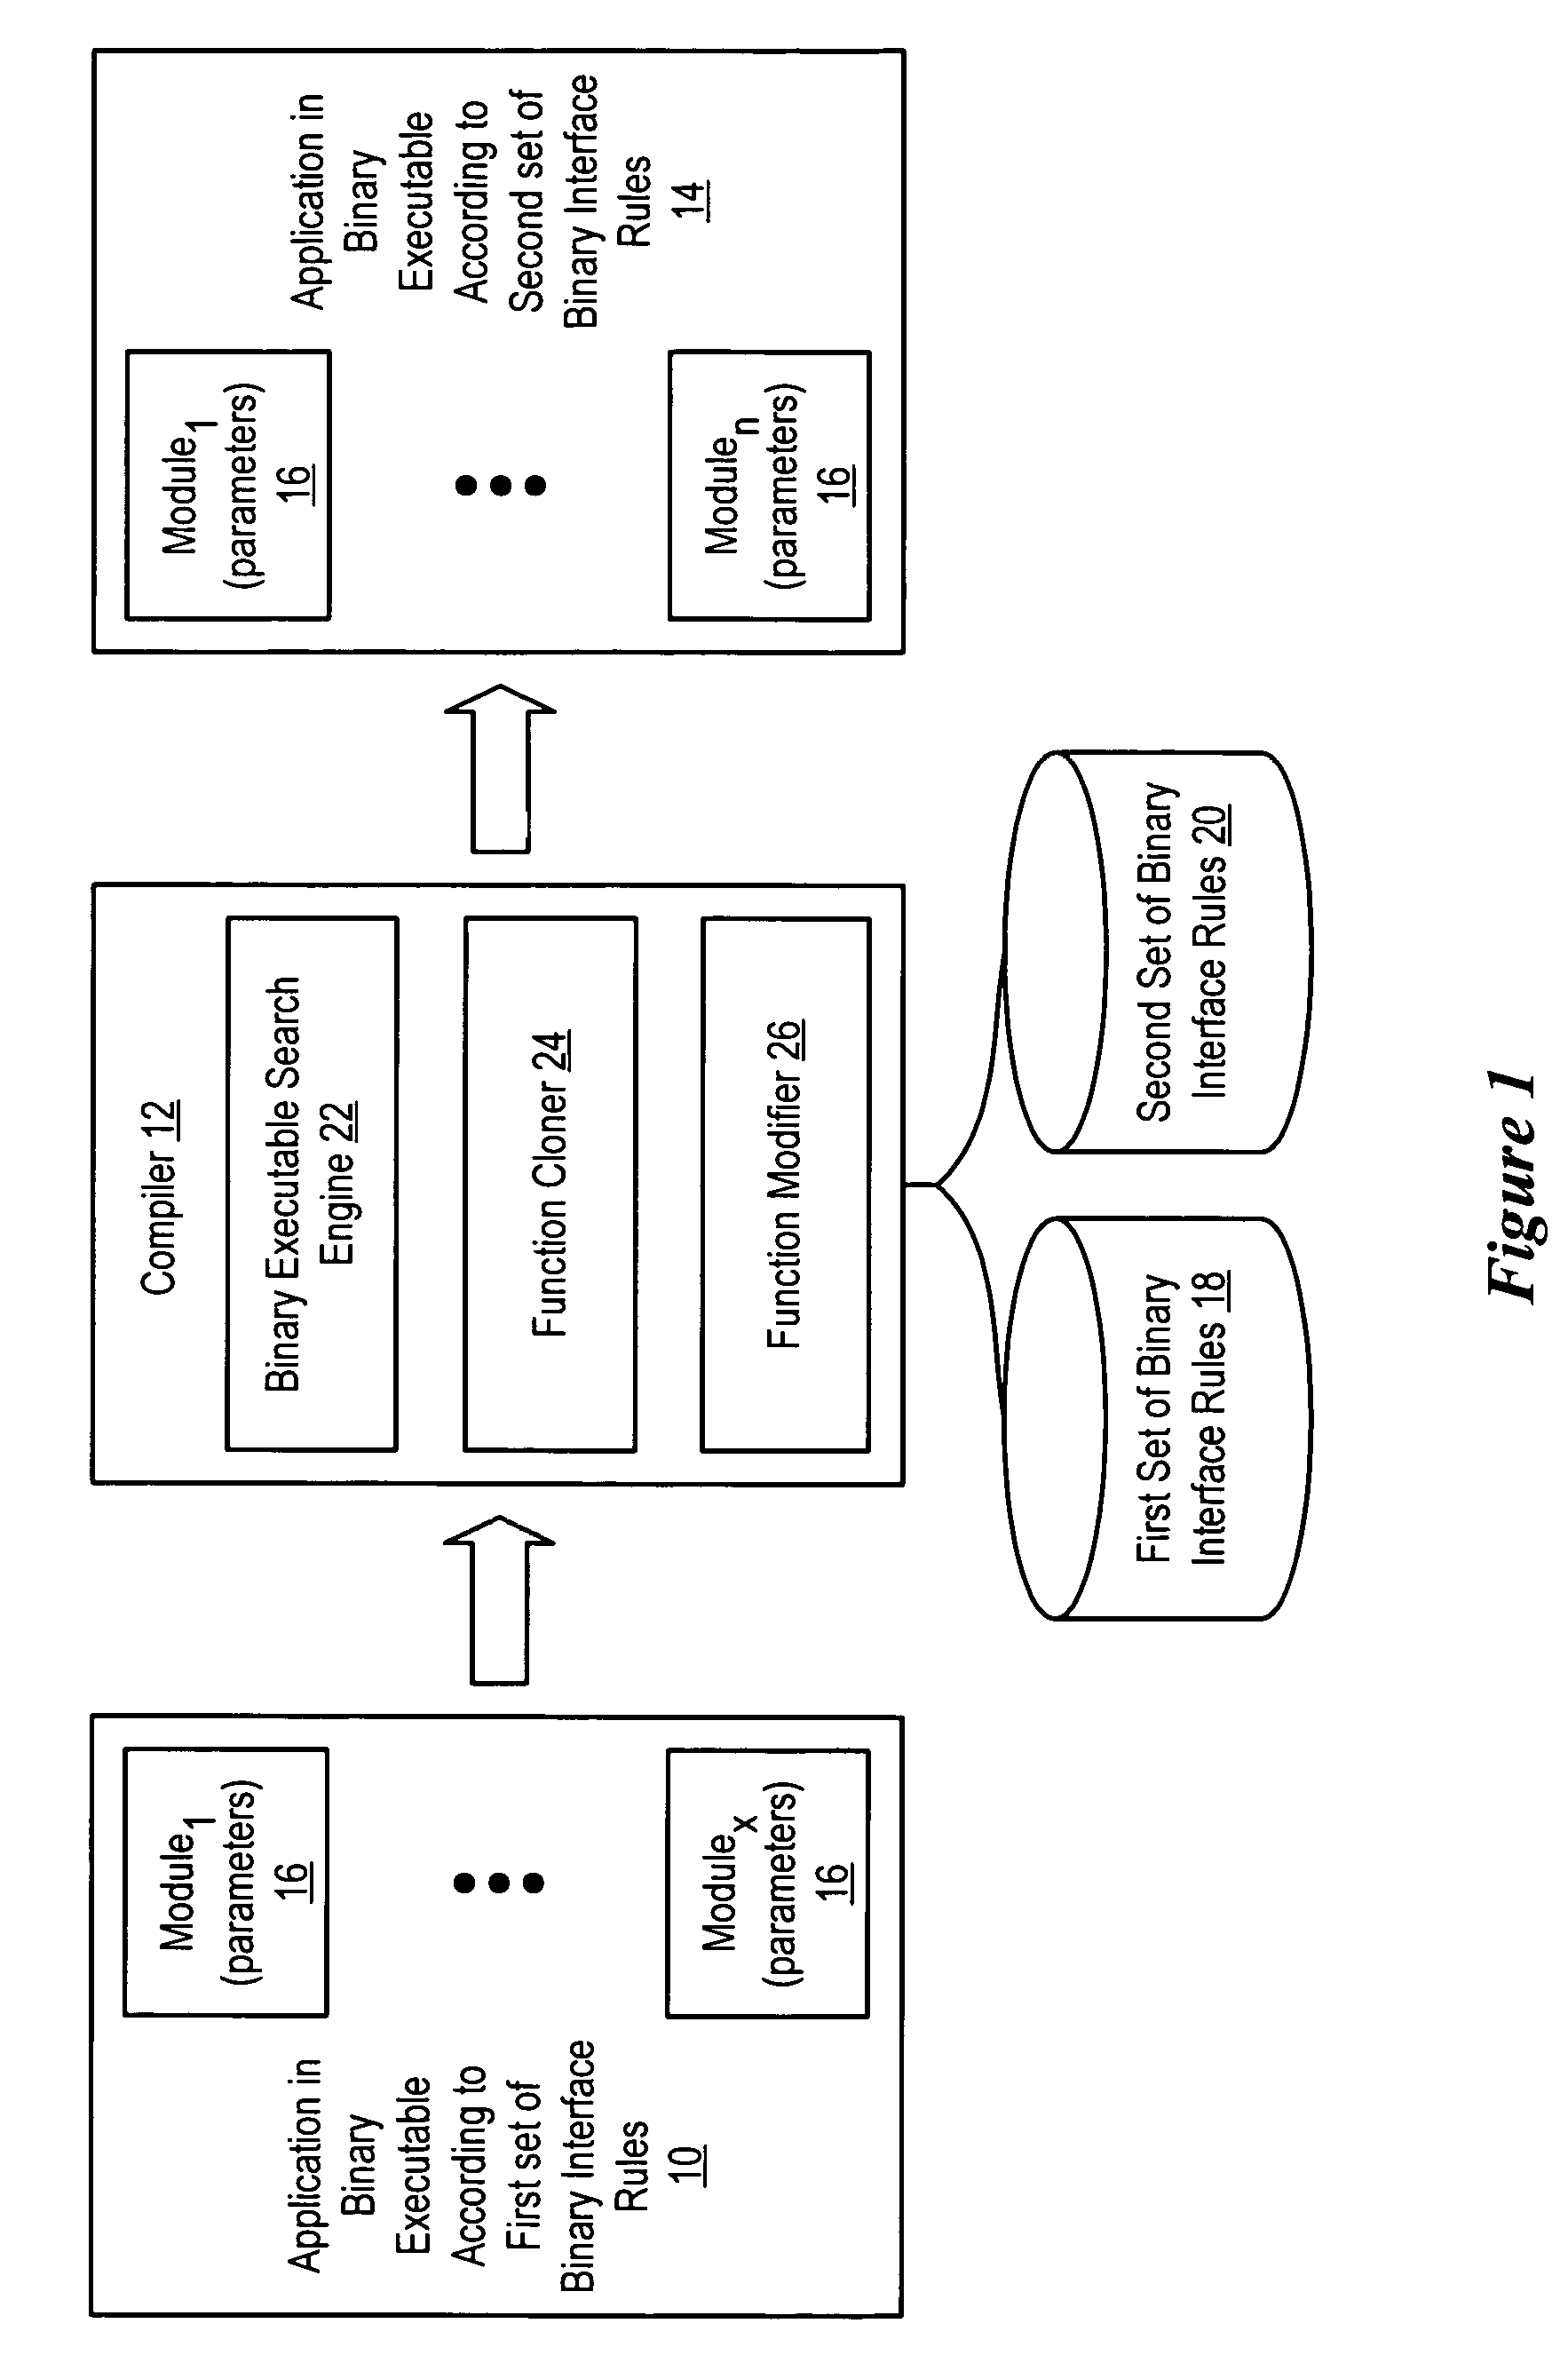 System and method for binary translation to improve parameter passing